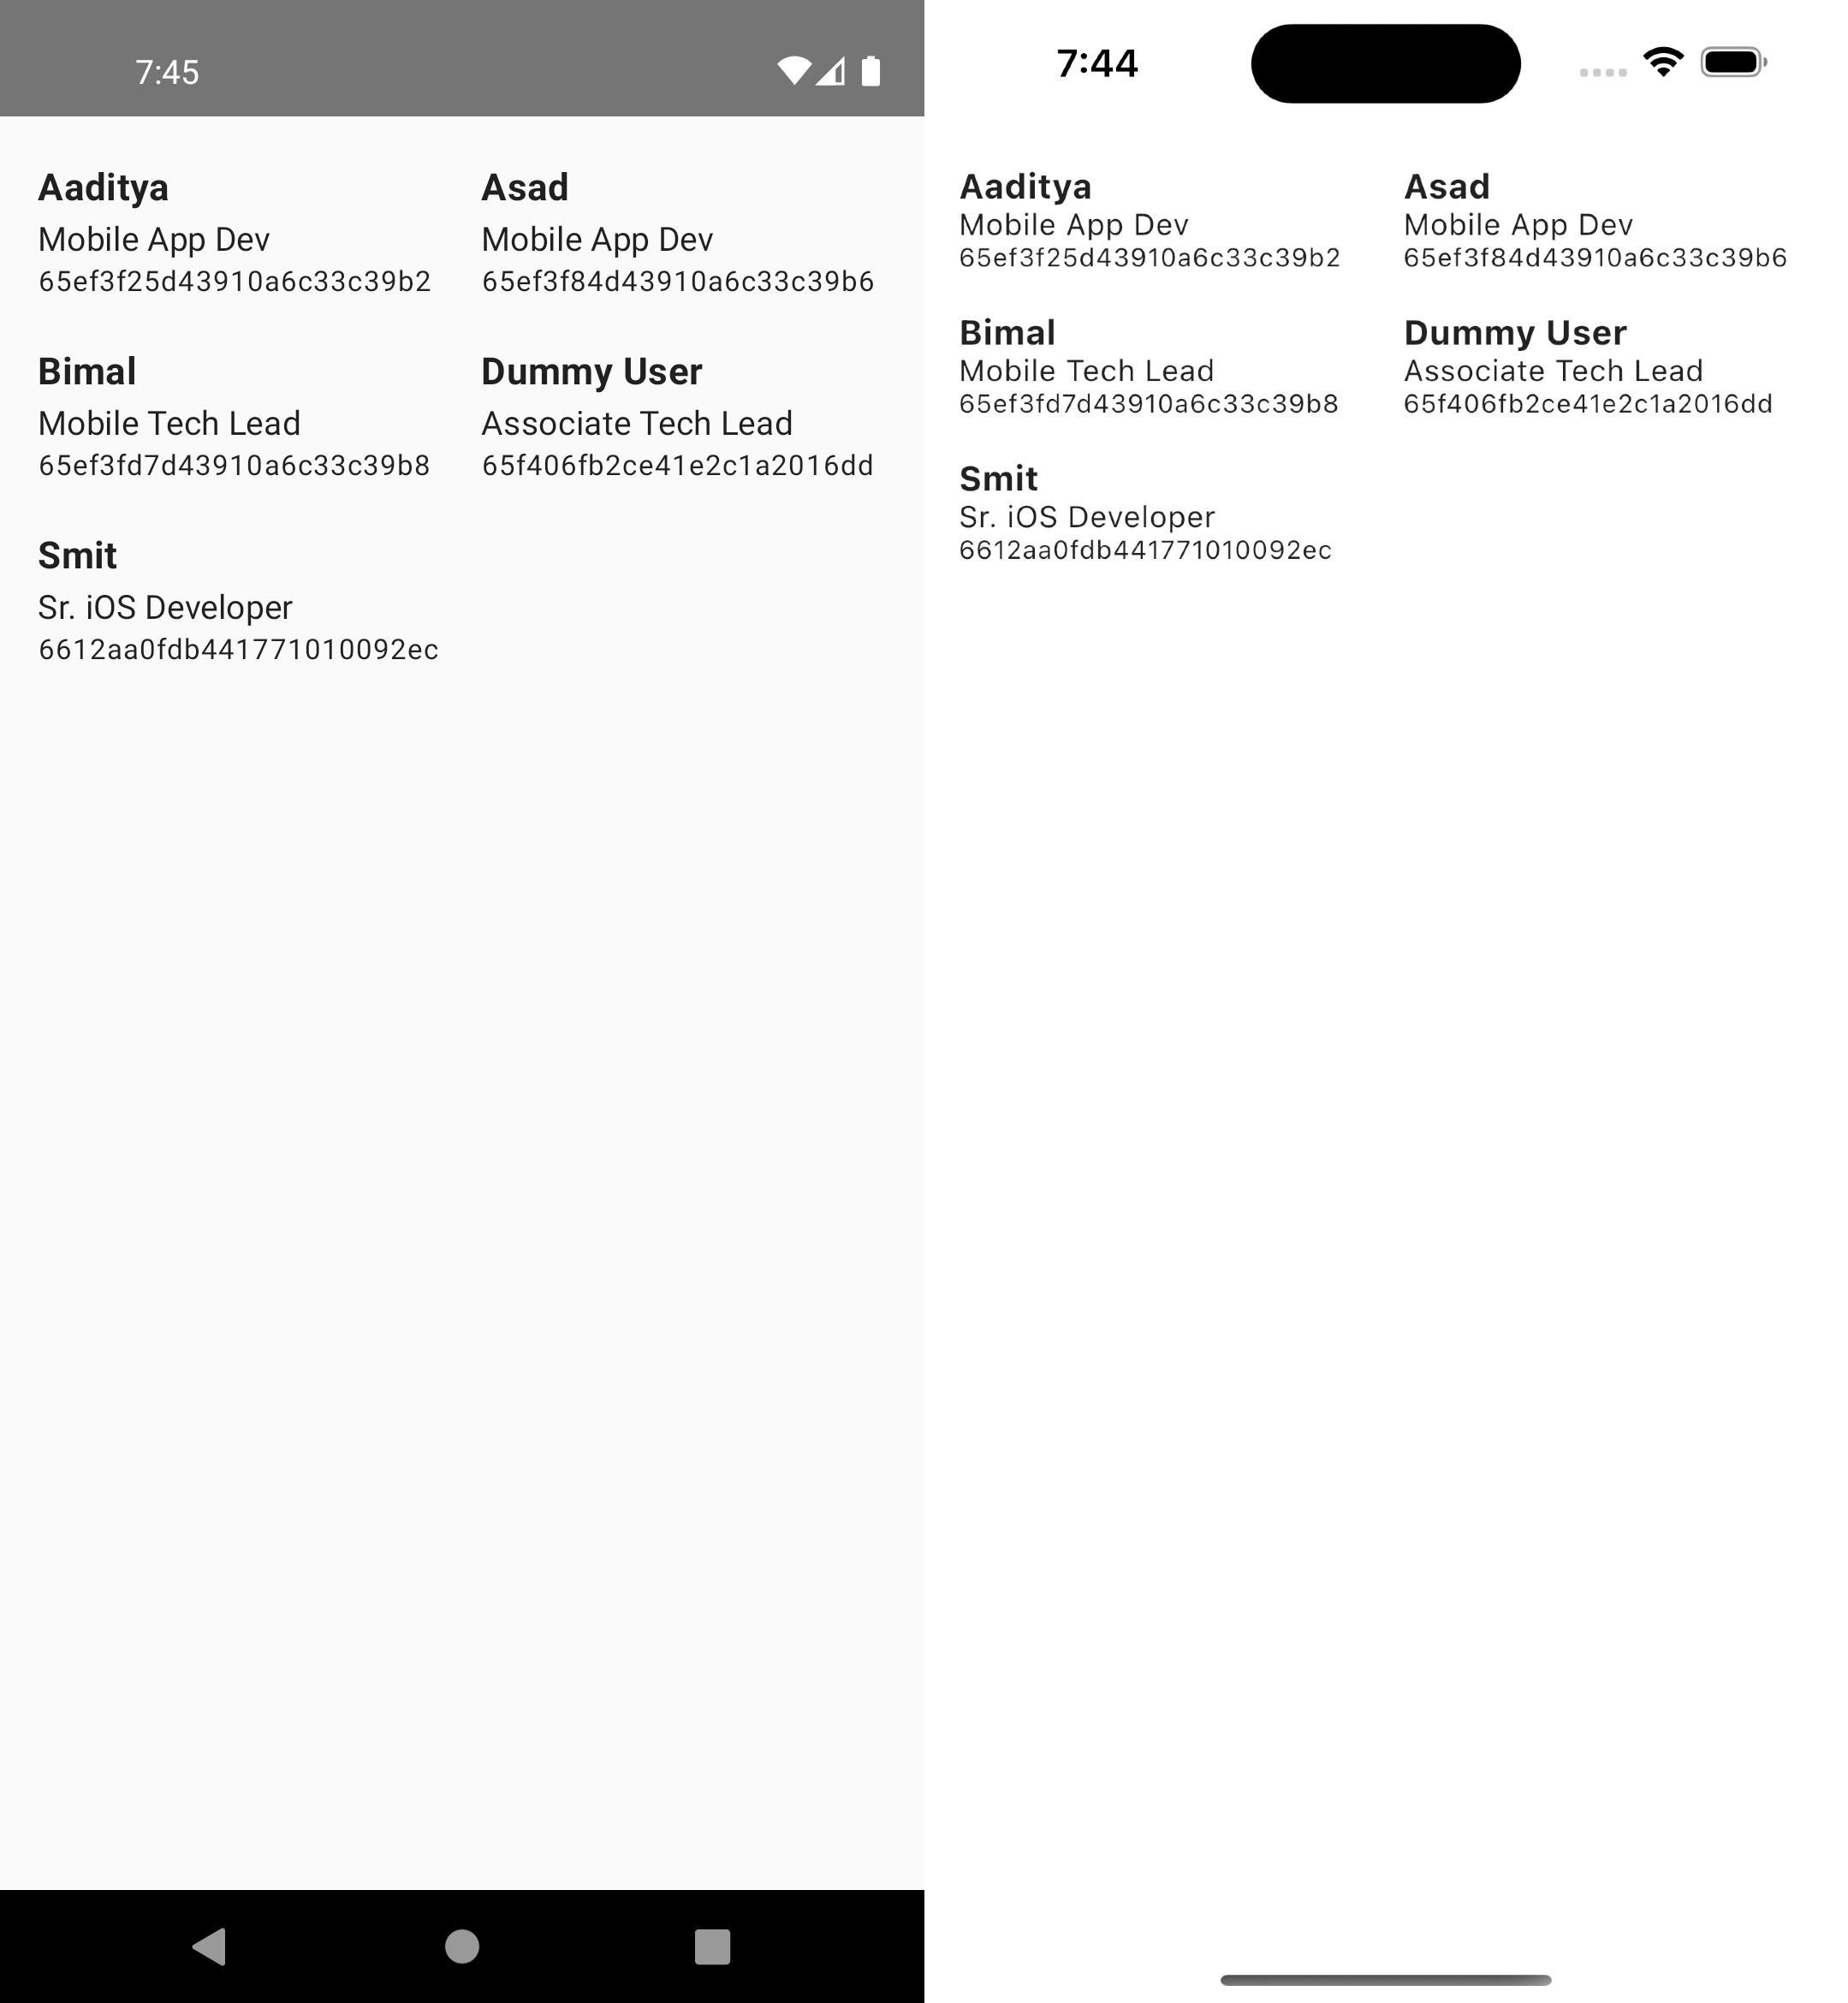 Screenshot of the app on Android (Left) & iOS (Right) devices.